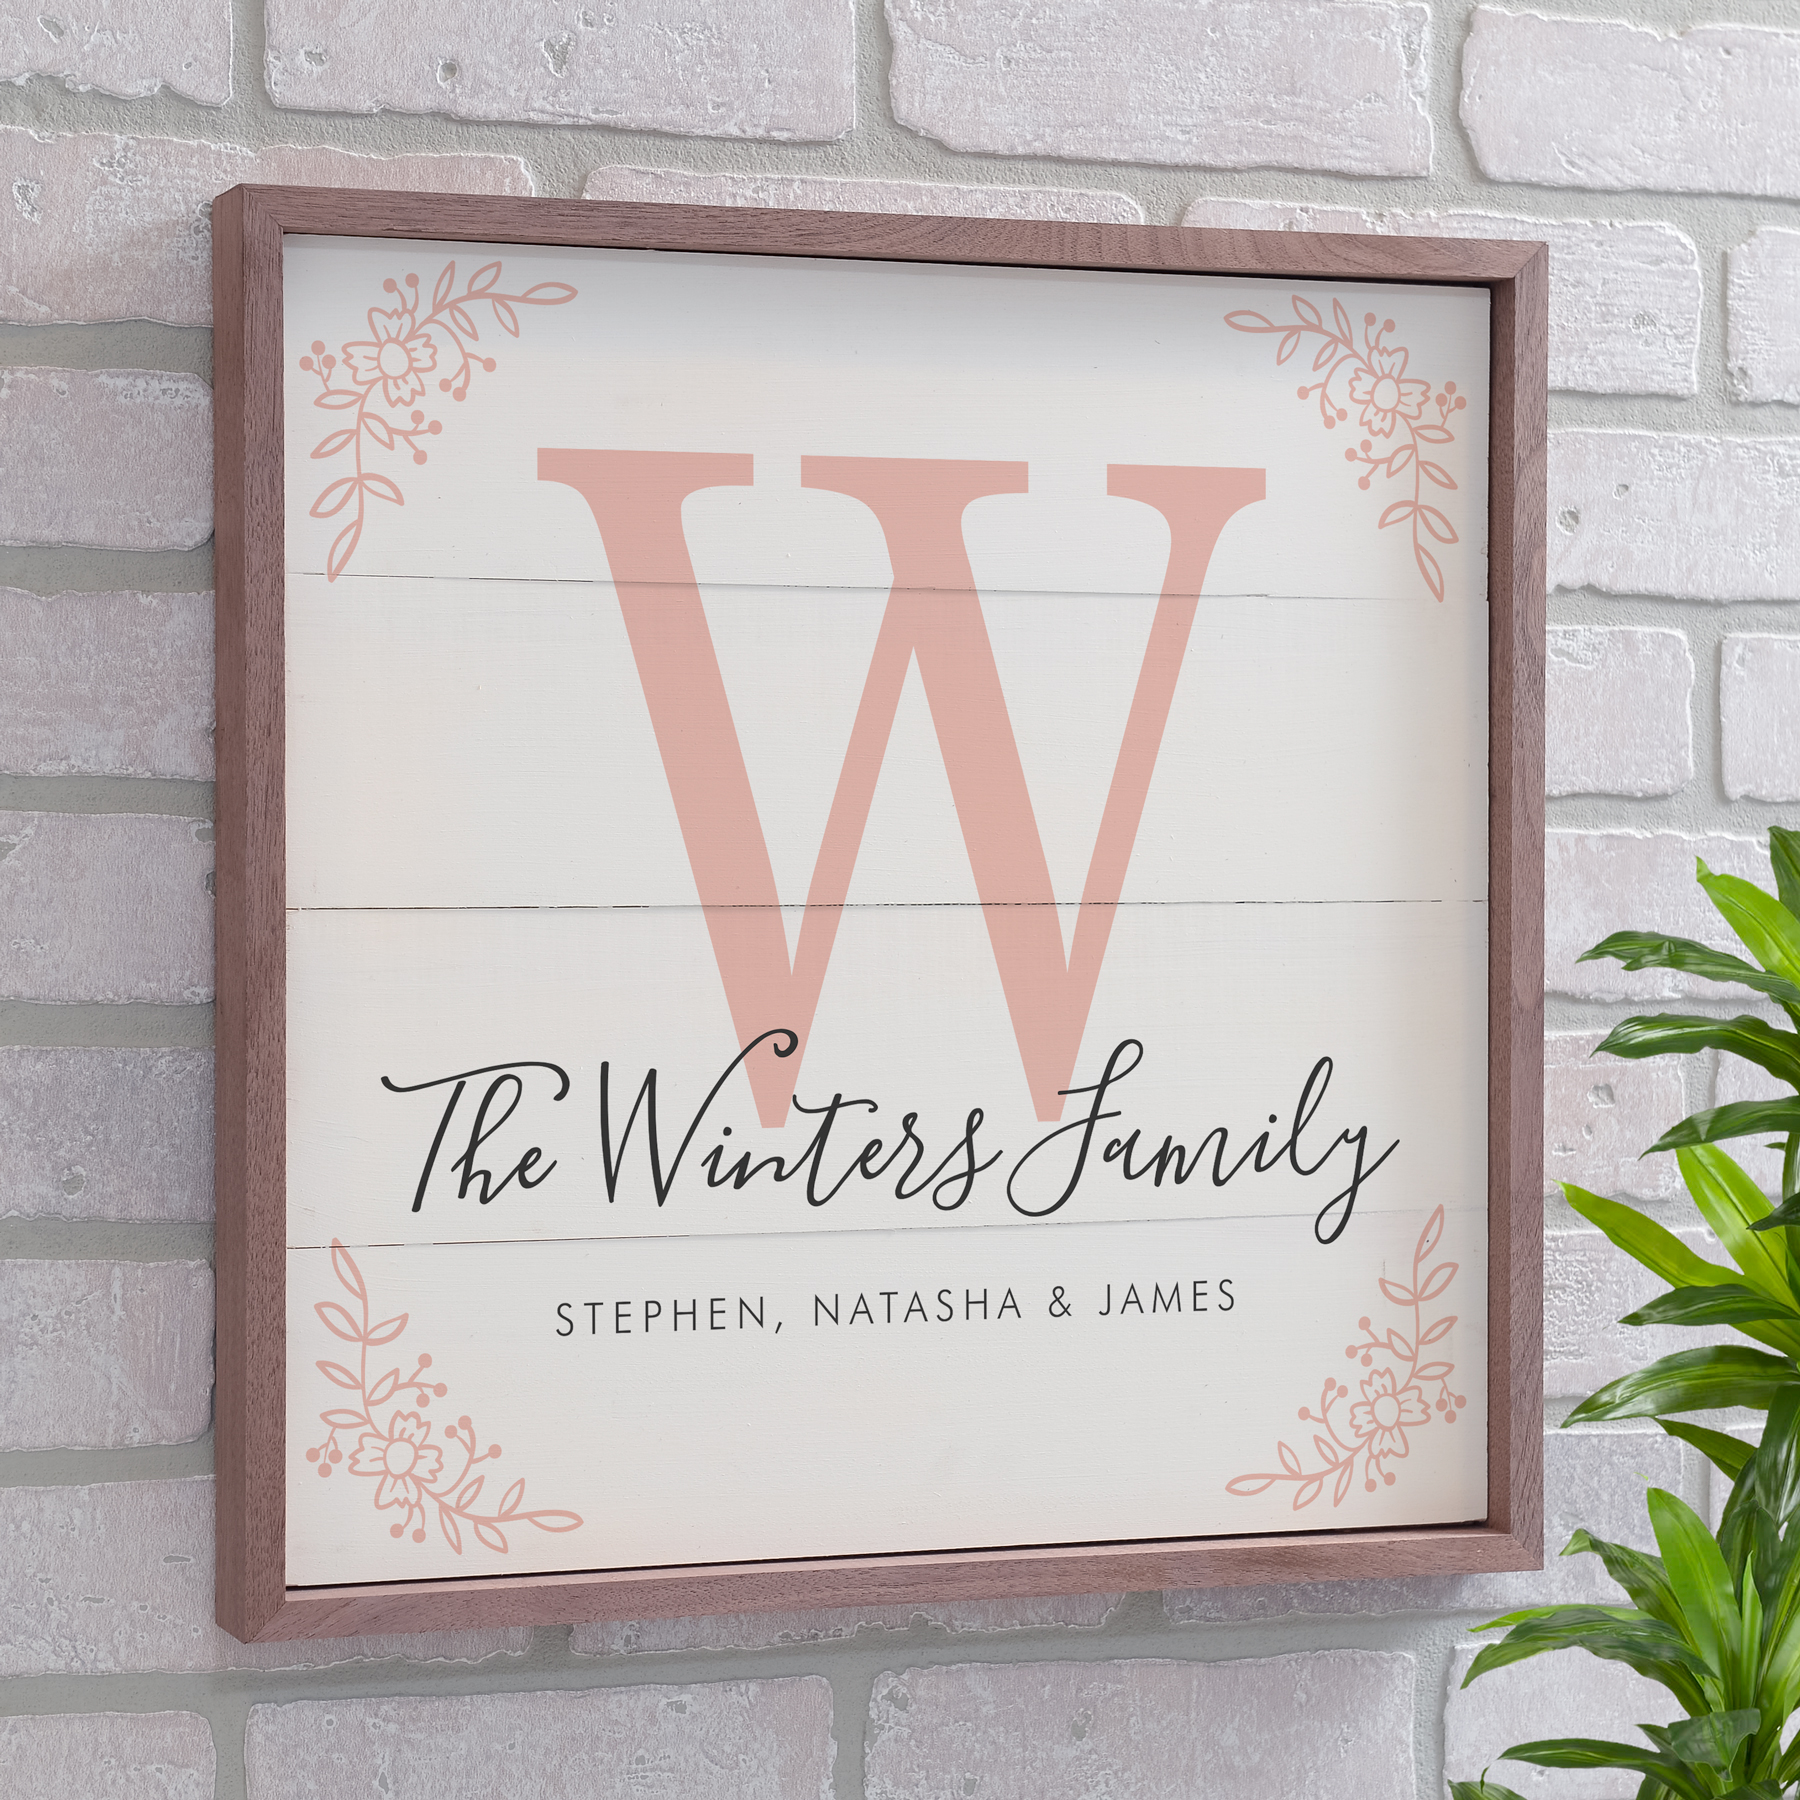 Personalized Family Framed Wall Sign | Personalized Family Name Wall Signs